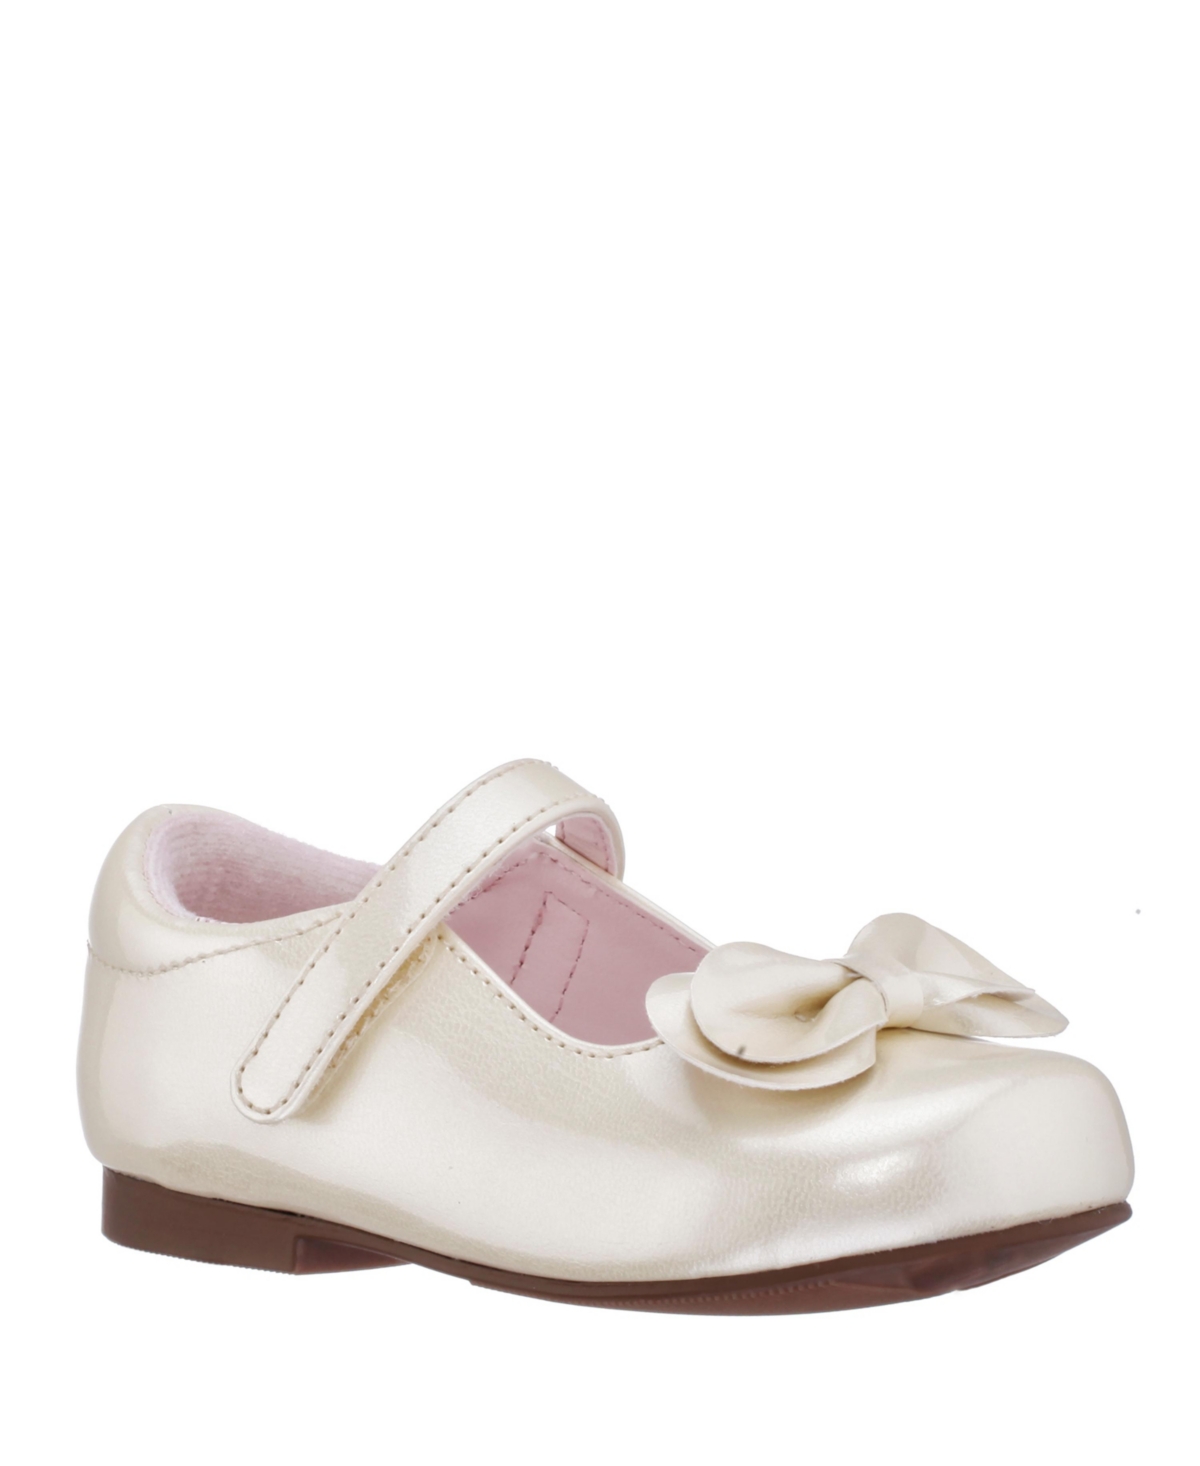 Nina Toddler Girls Decorative Bow Krista Dress Shoes In Ivory Liquid Patent